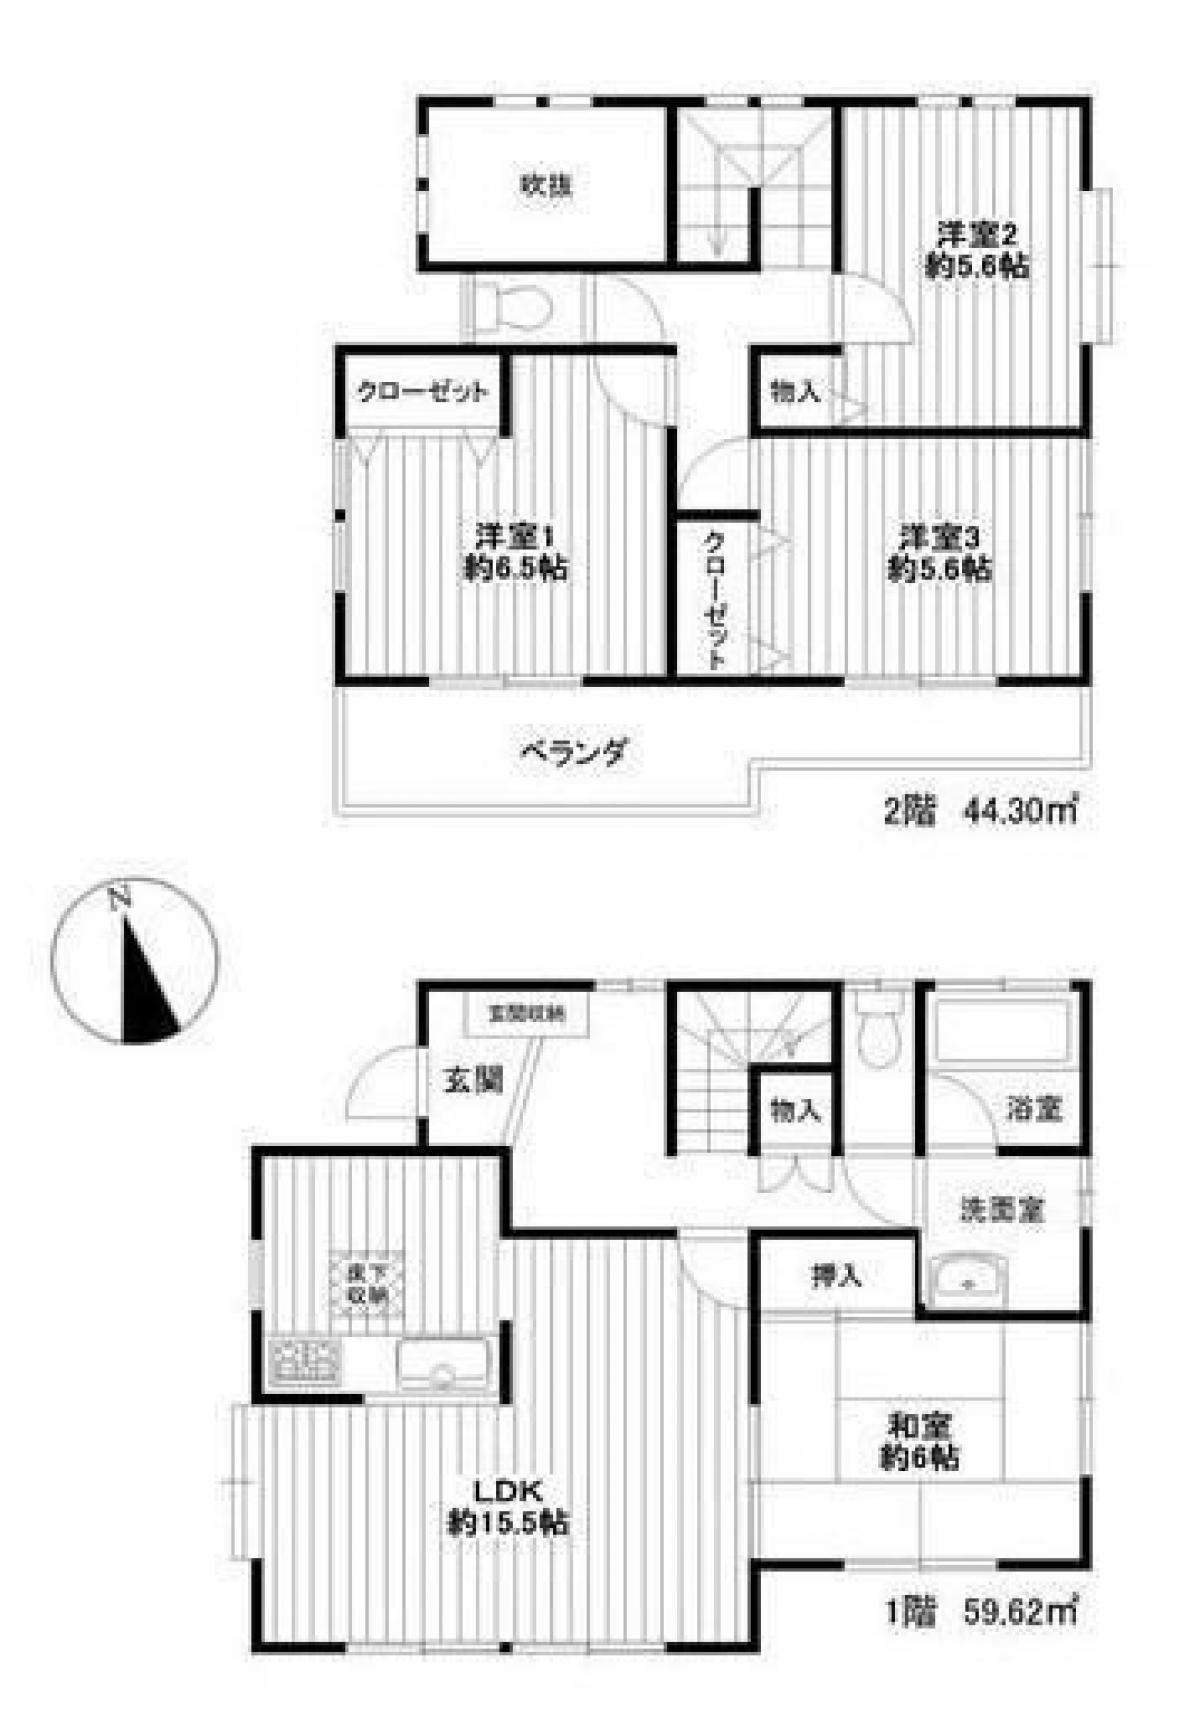 Picture of Home For Sale in Yachiyo Shi, Chiba, Japan